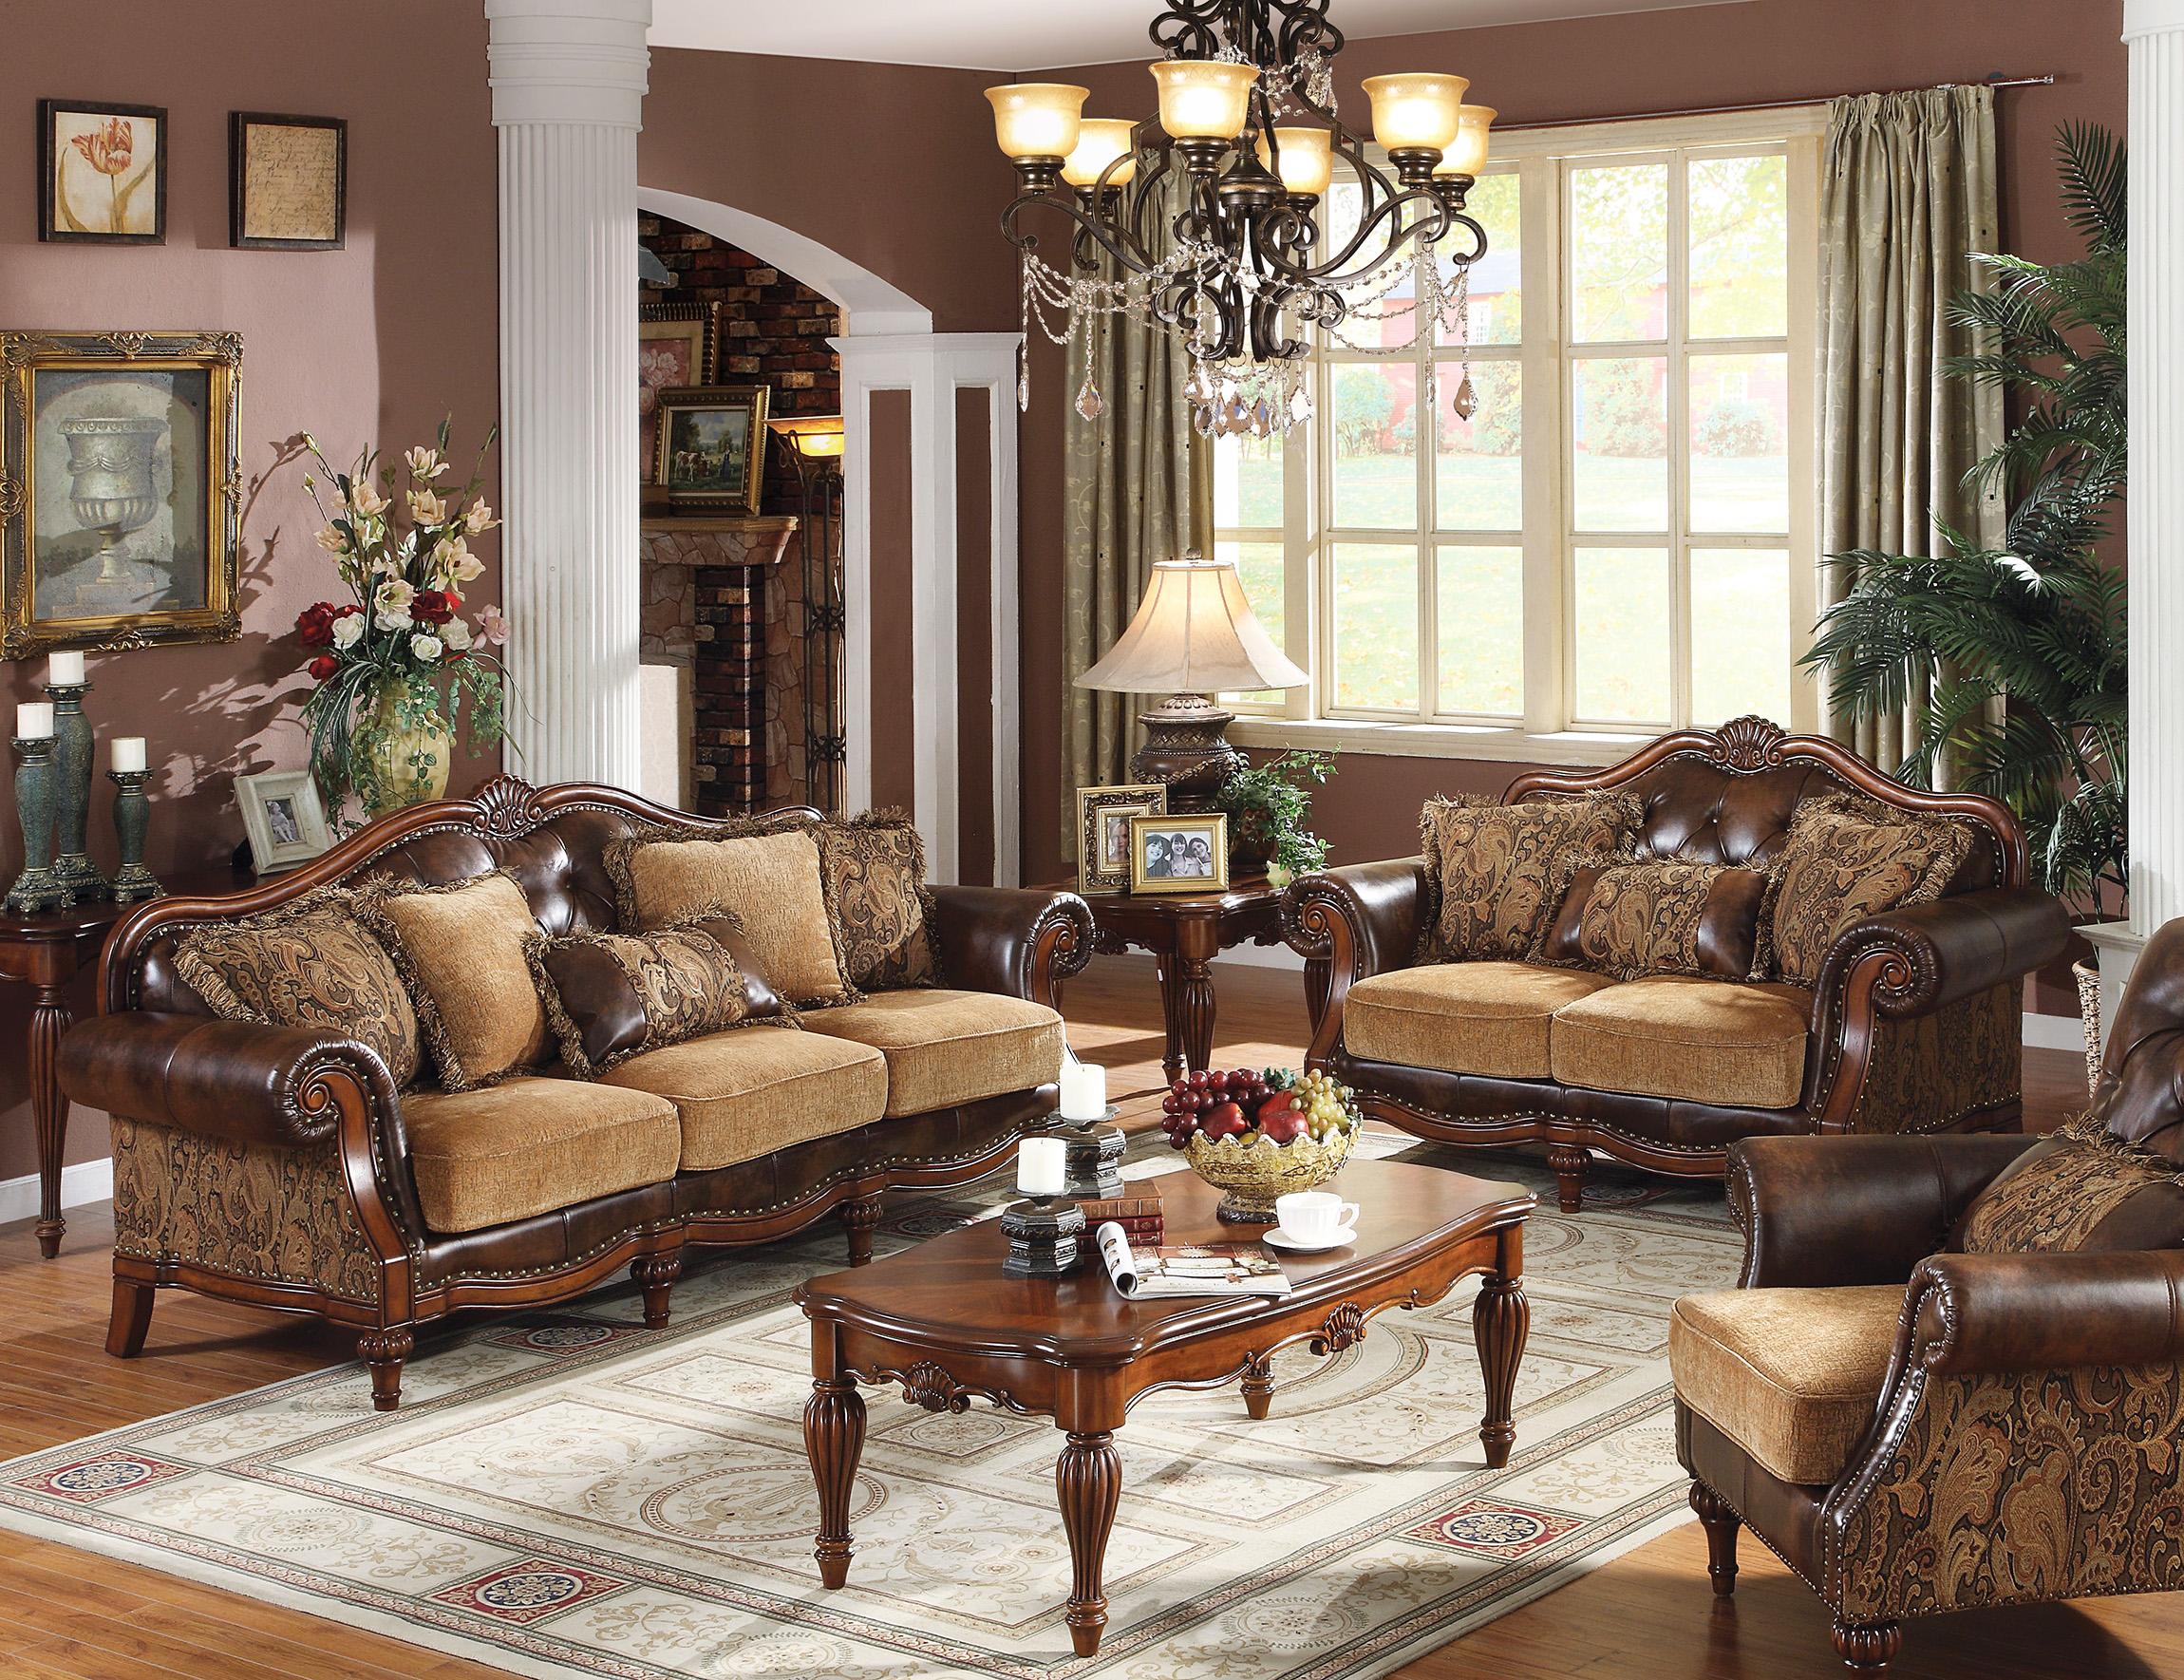 Classic, Traditional Sofa and Loveseat Set Dreena 05495 Dreena-05495-Set-2 in Cherry, Brown Bonded Leather